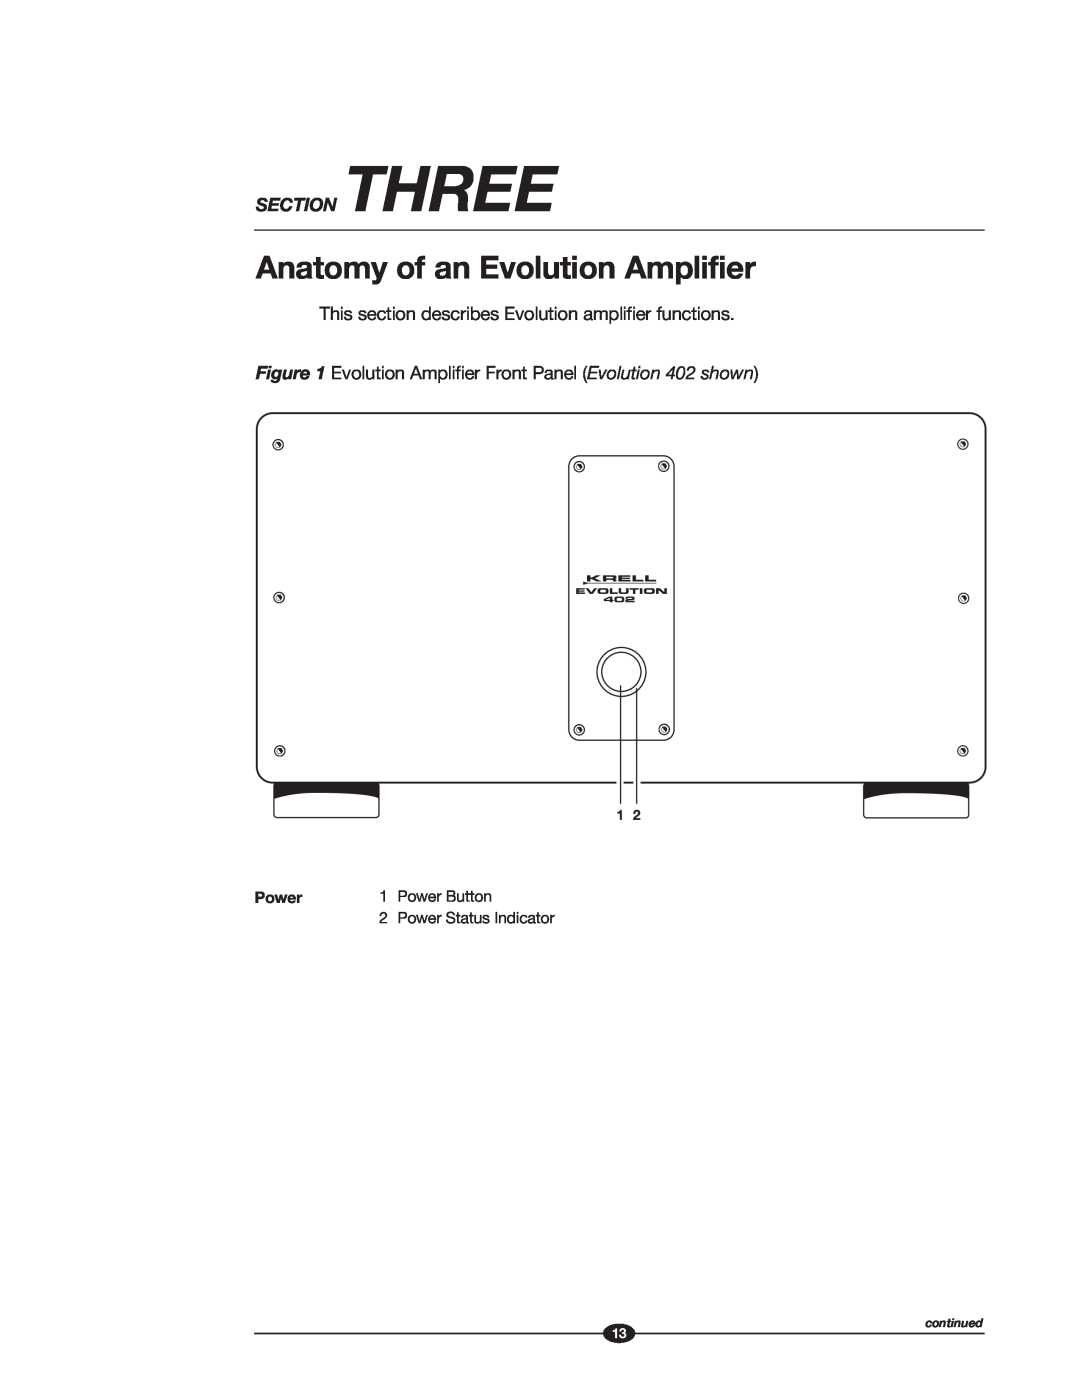 Krell Industries manual Anatomy of an Evolution Amplifier, Section Three 